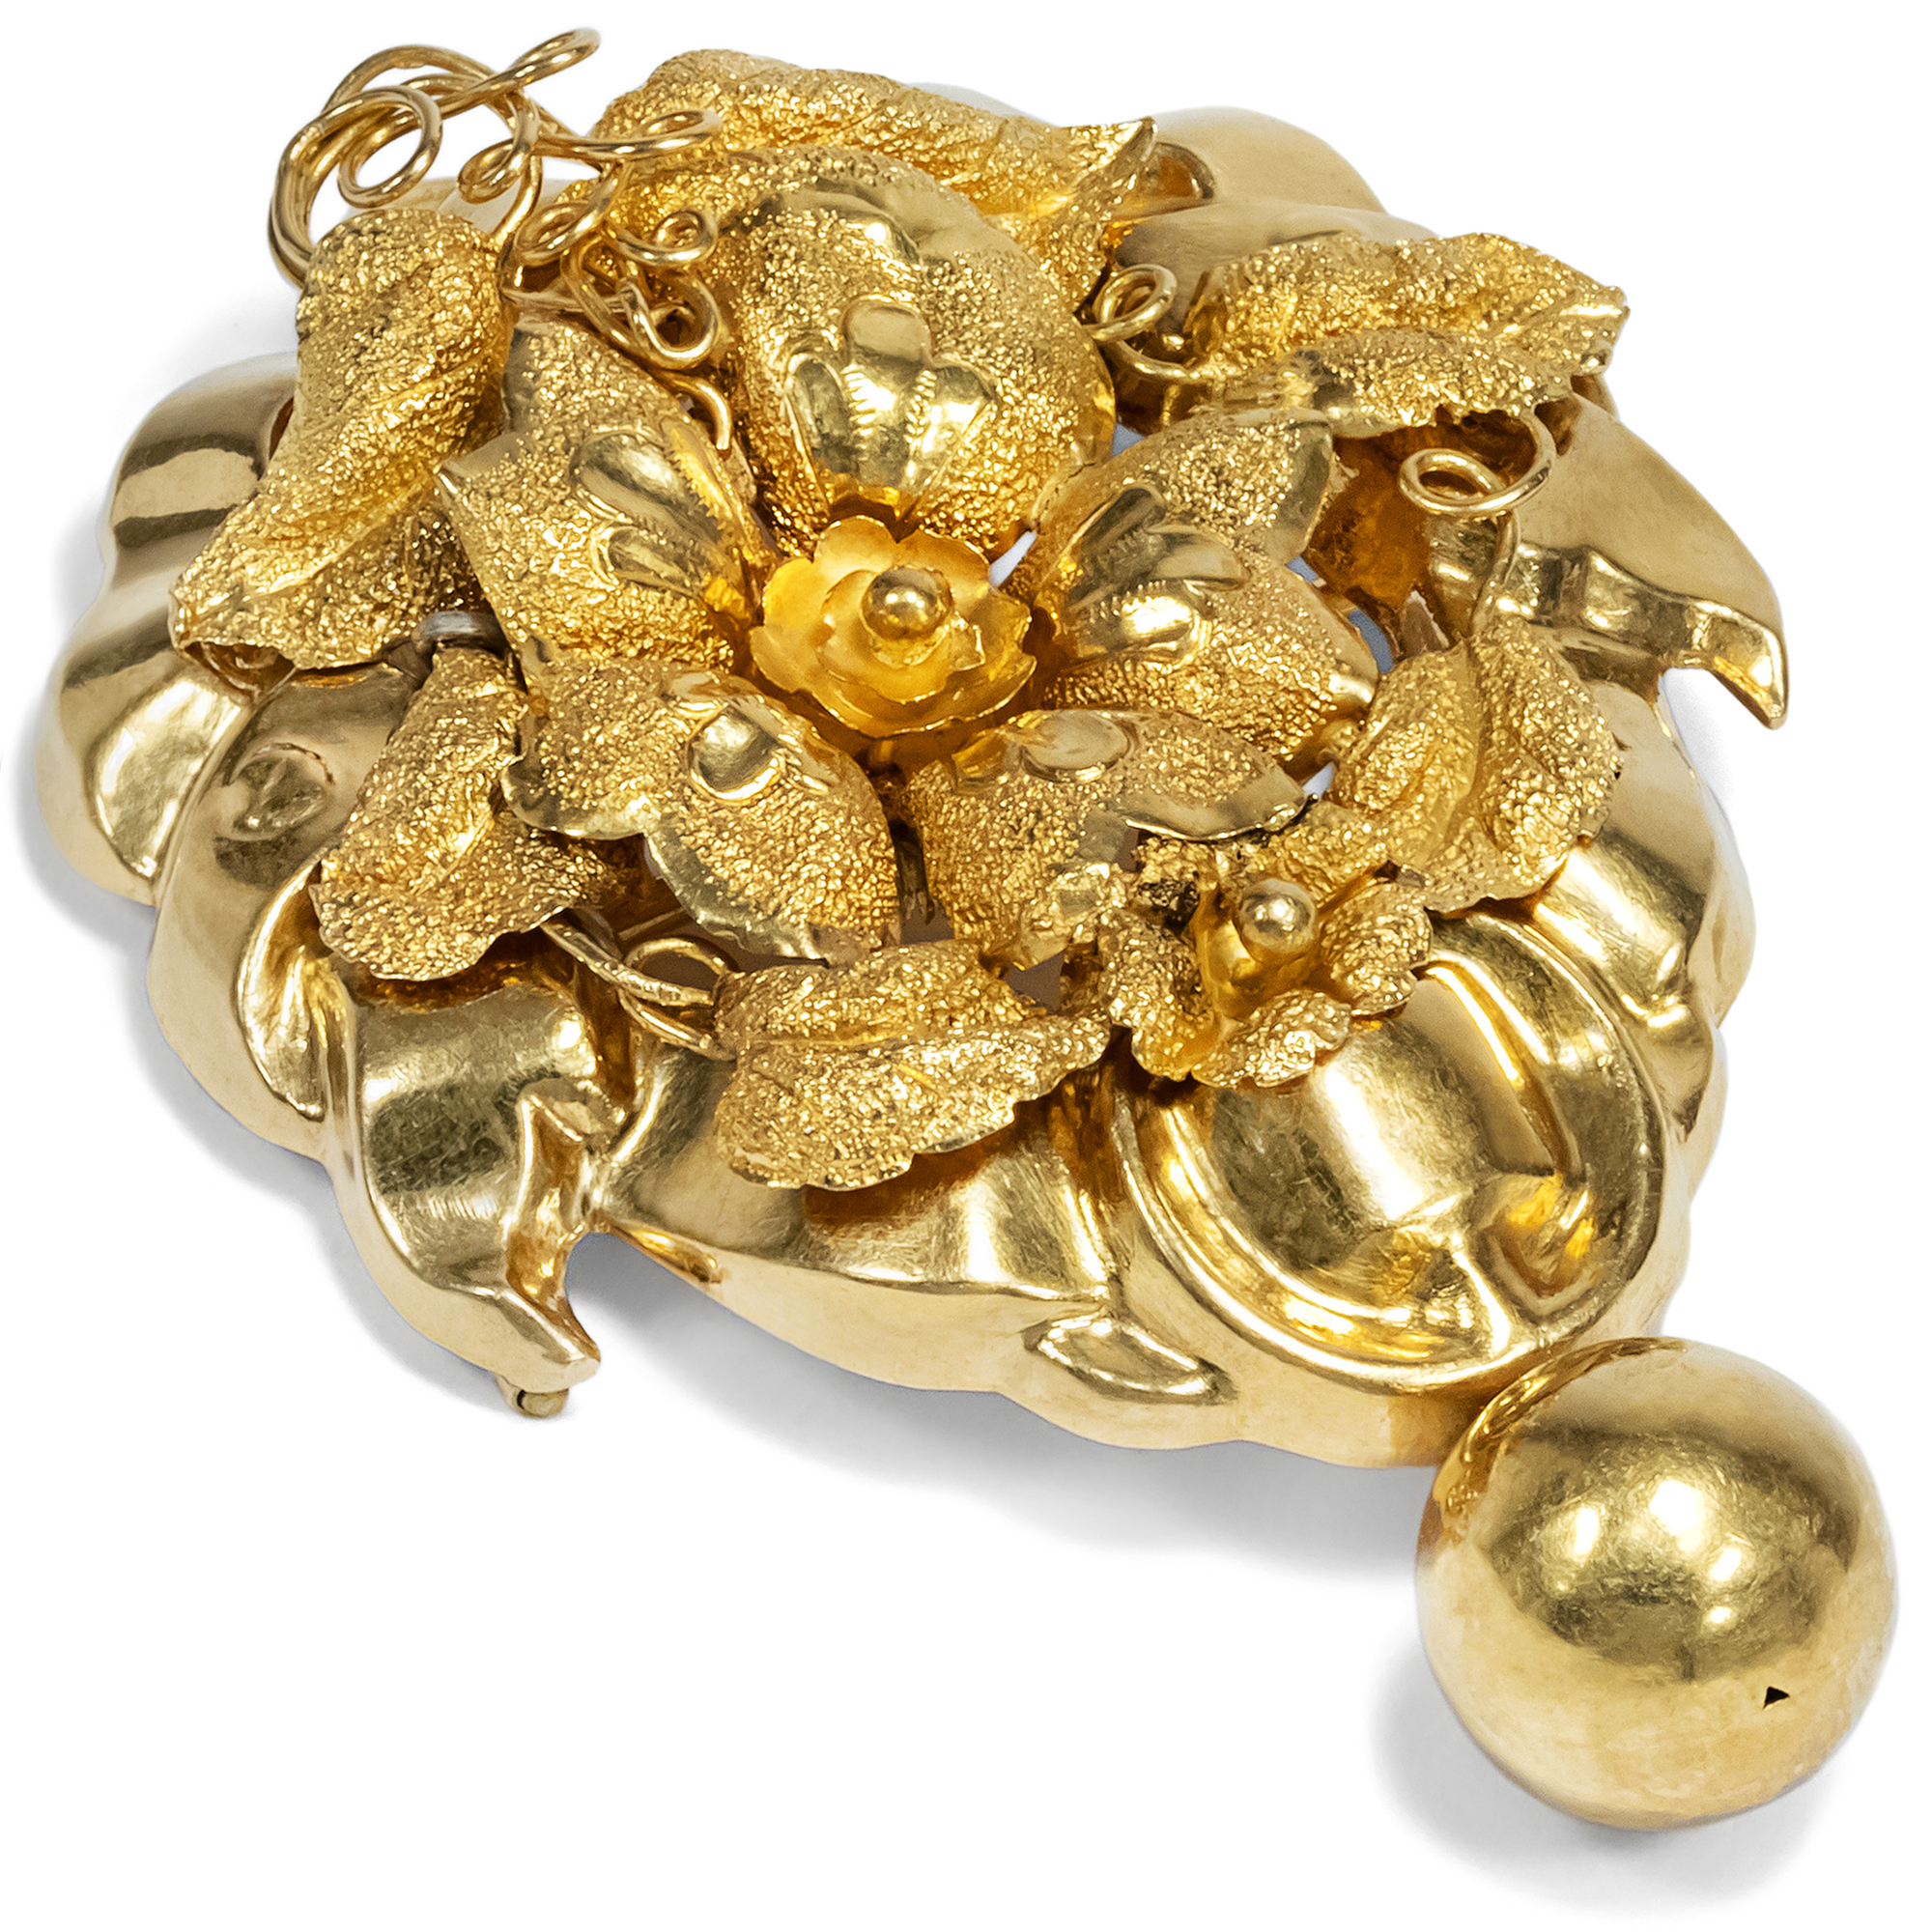 Large Early Victorian Naturalistic Gold Brooch, c. 1845